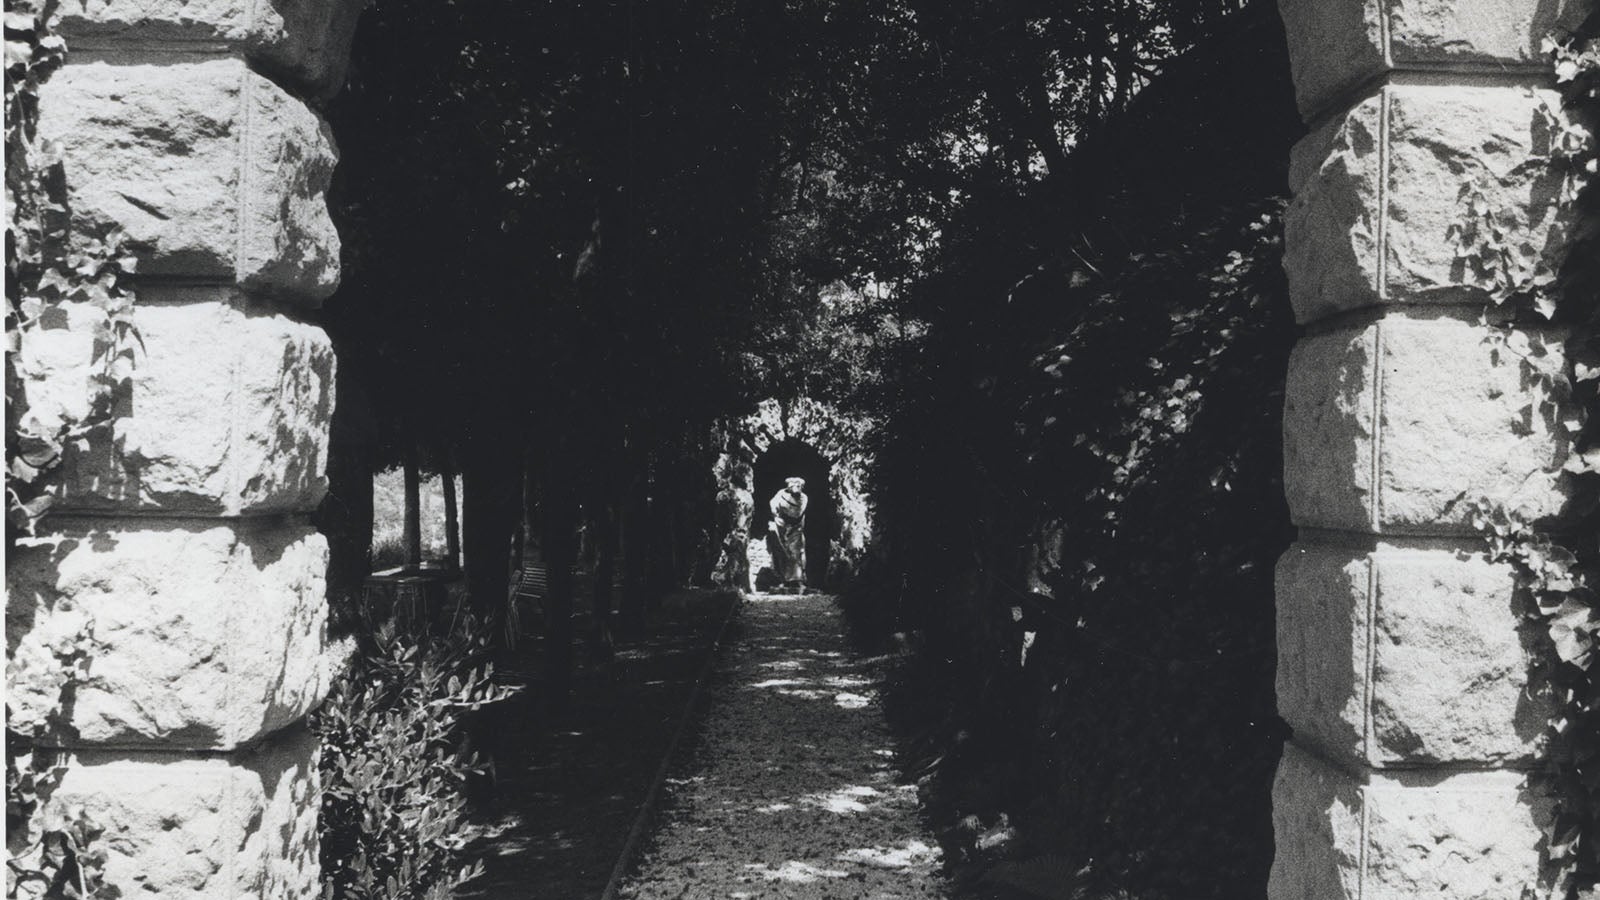 Black and white photo of a stone archway, surrounded by vines. Through the archway, we see down the previously depicted pathway to the statue of the man in robes.